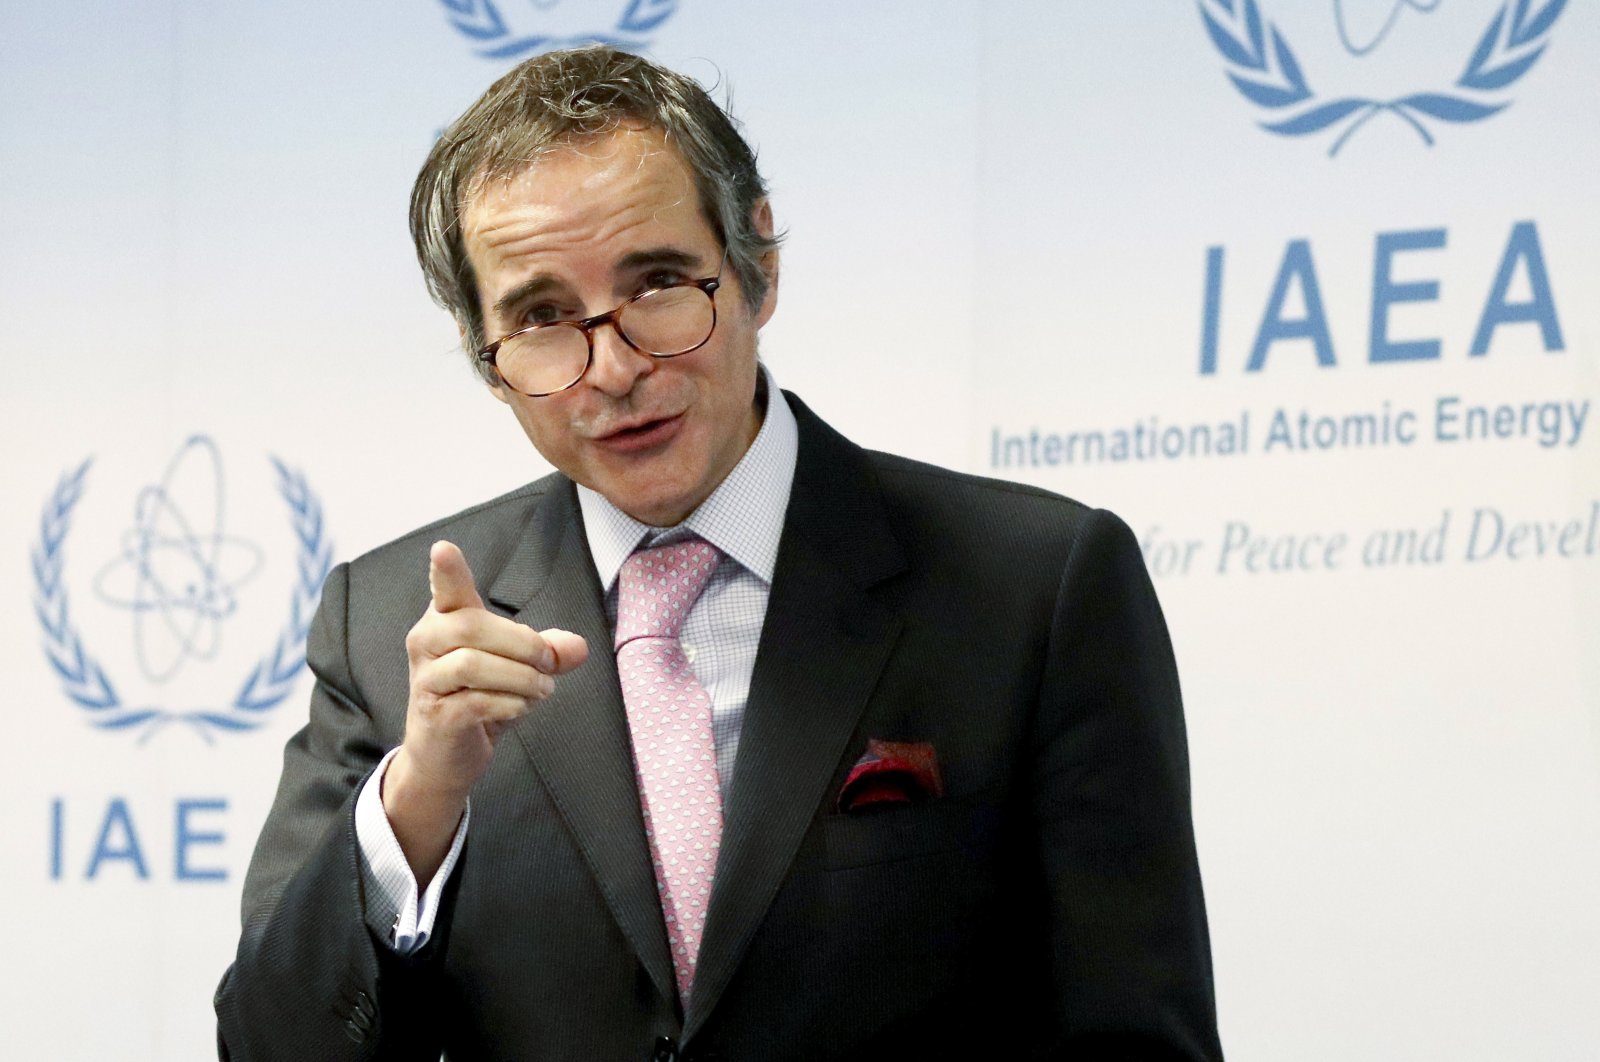 International Atomic Energy Agency (IAEA) Director General Rafael Mariano Grossi addresses the media during a news conference at the International Center in Vienna, Austria, March 1, 2021. (AP Photo)